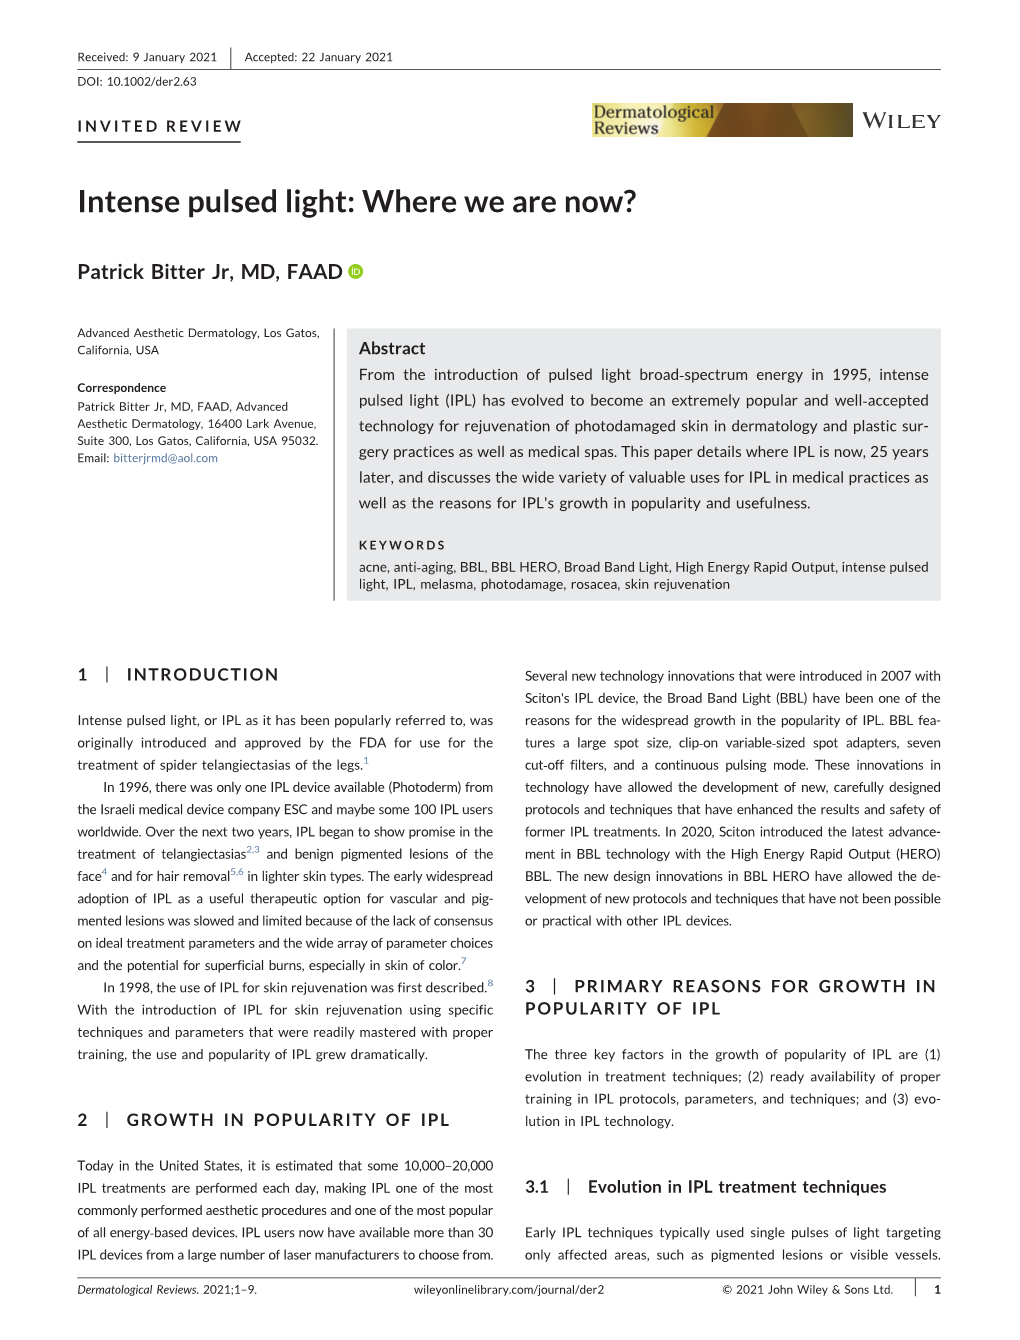 Intense Pulsed Light: Where We Are Now?